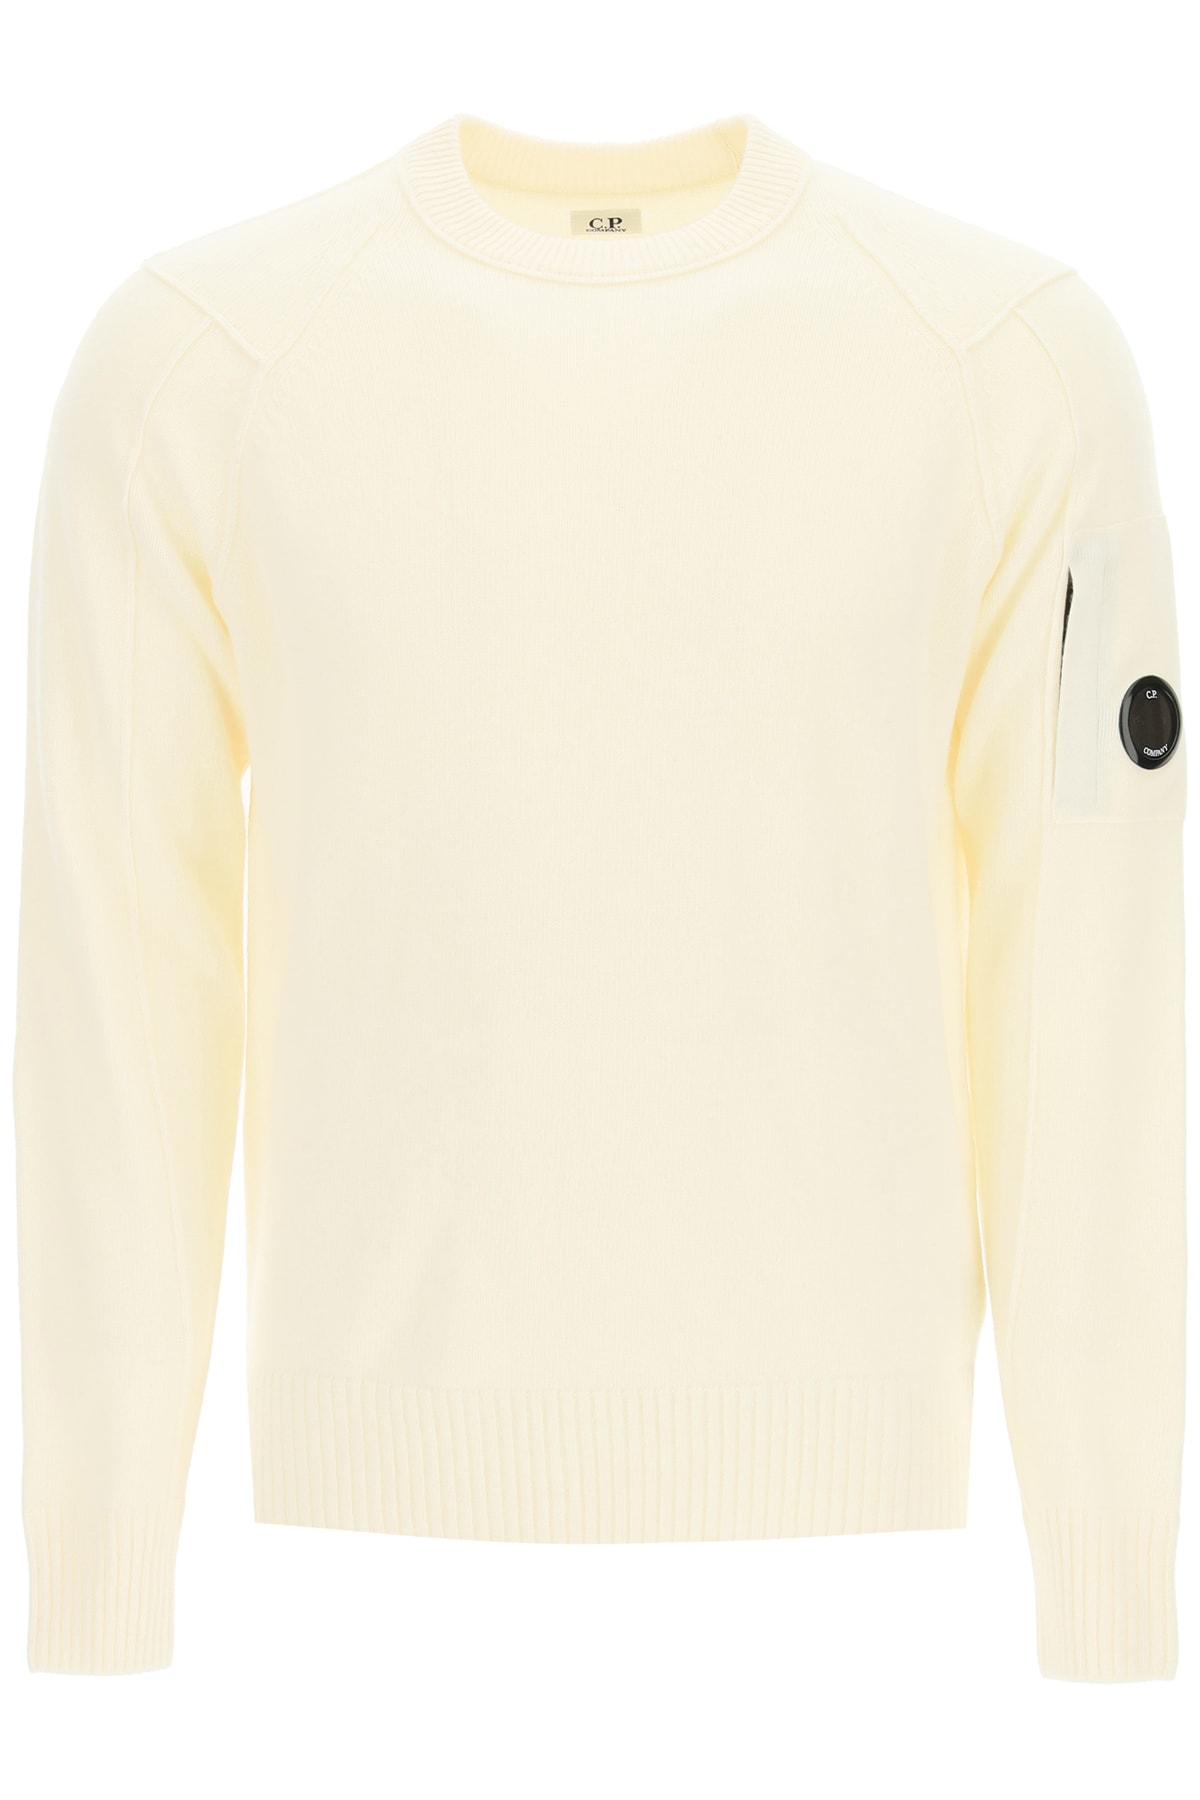 C.P. Company Sweater With Stitching And Lens